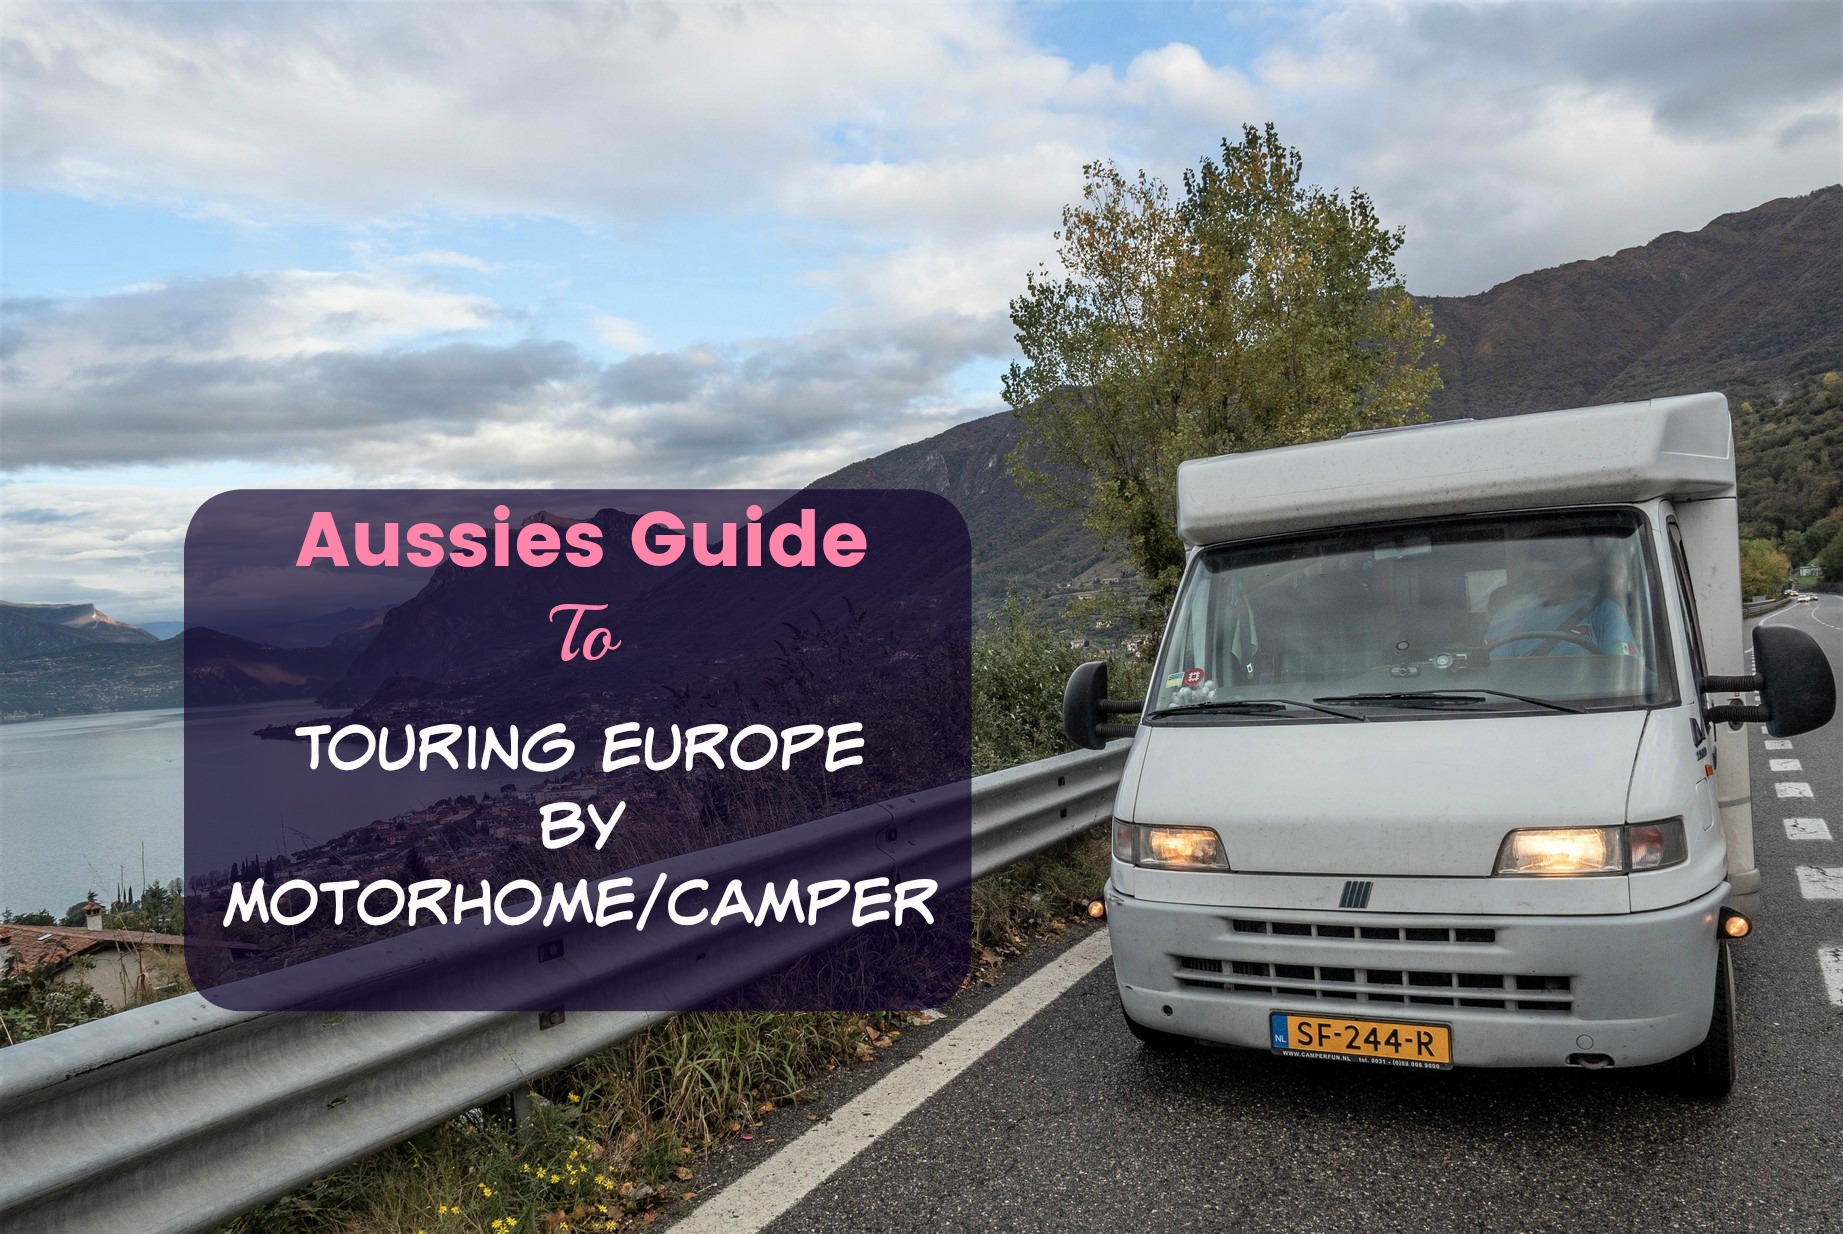 Aussies Guide to Touring Europe with a Motorhome/Camper